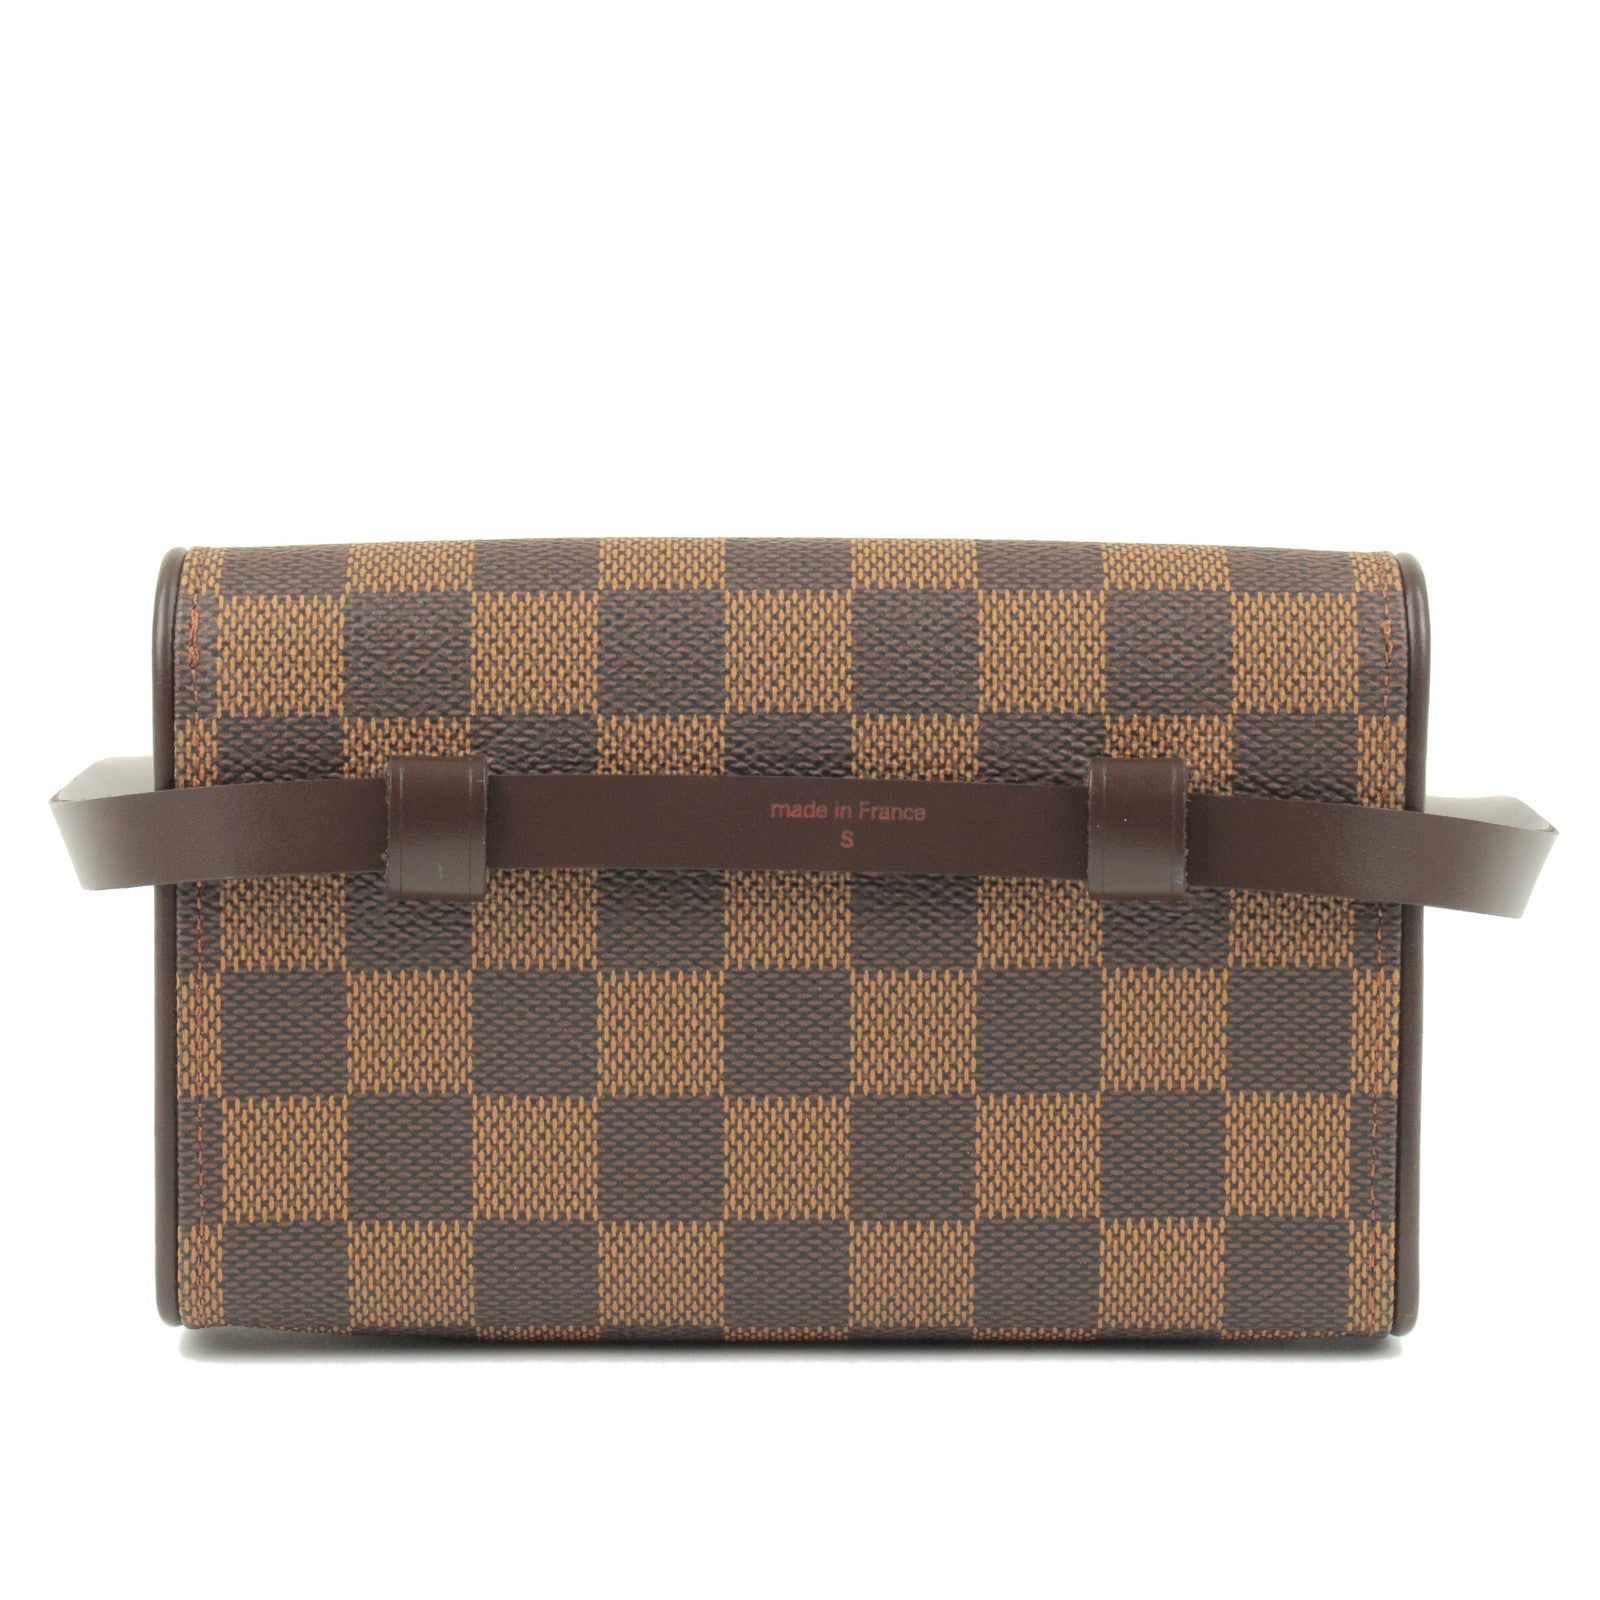 Louis Vuitton Pre-owned Women's Wallet - Brown - One Size